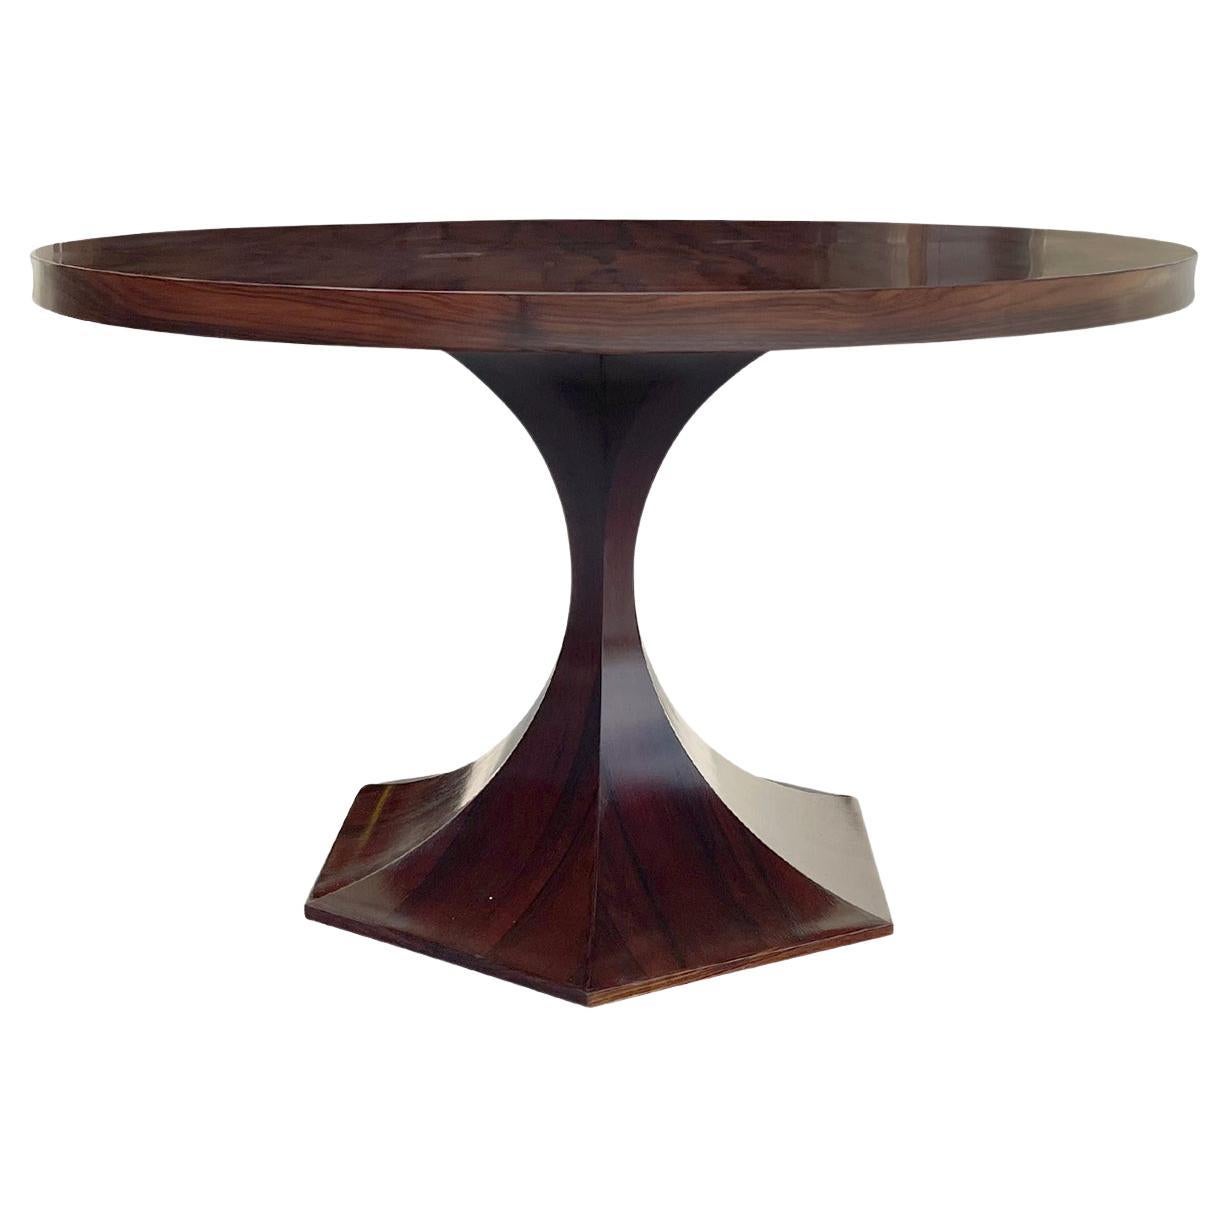 20th Century Italian Modern Vintage Polished Rosewood Dining, Center Table